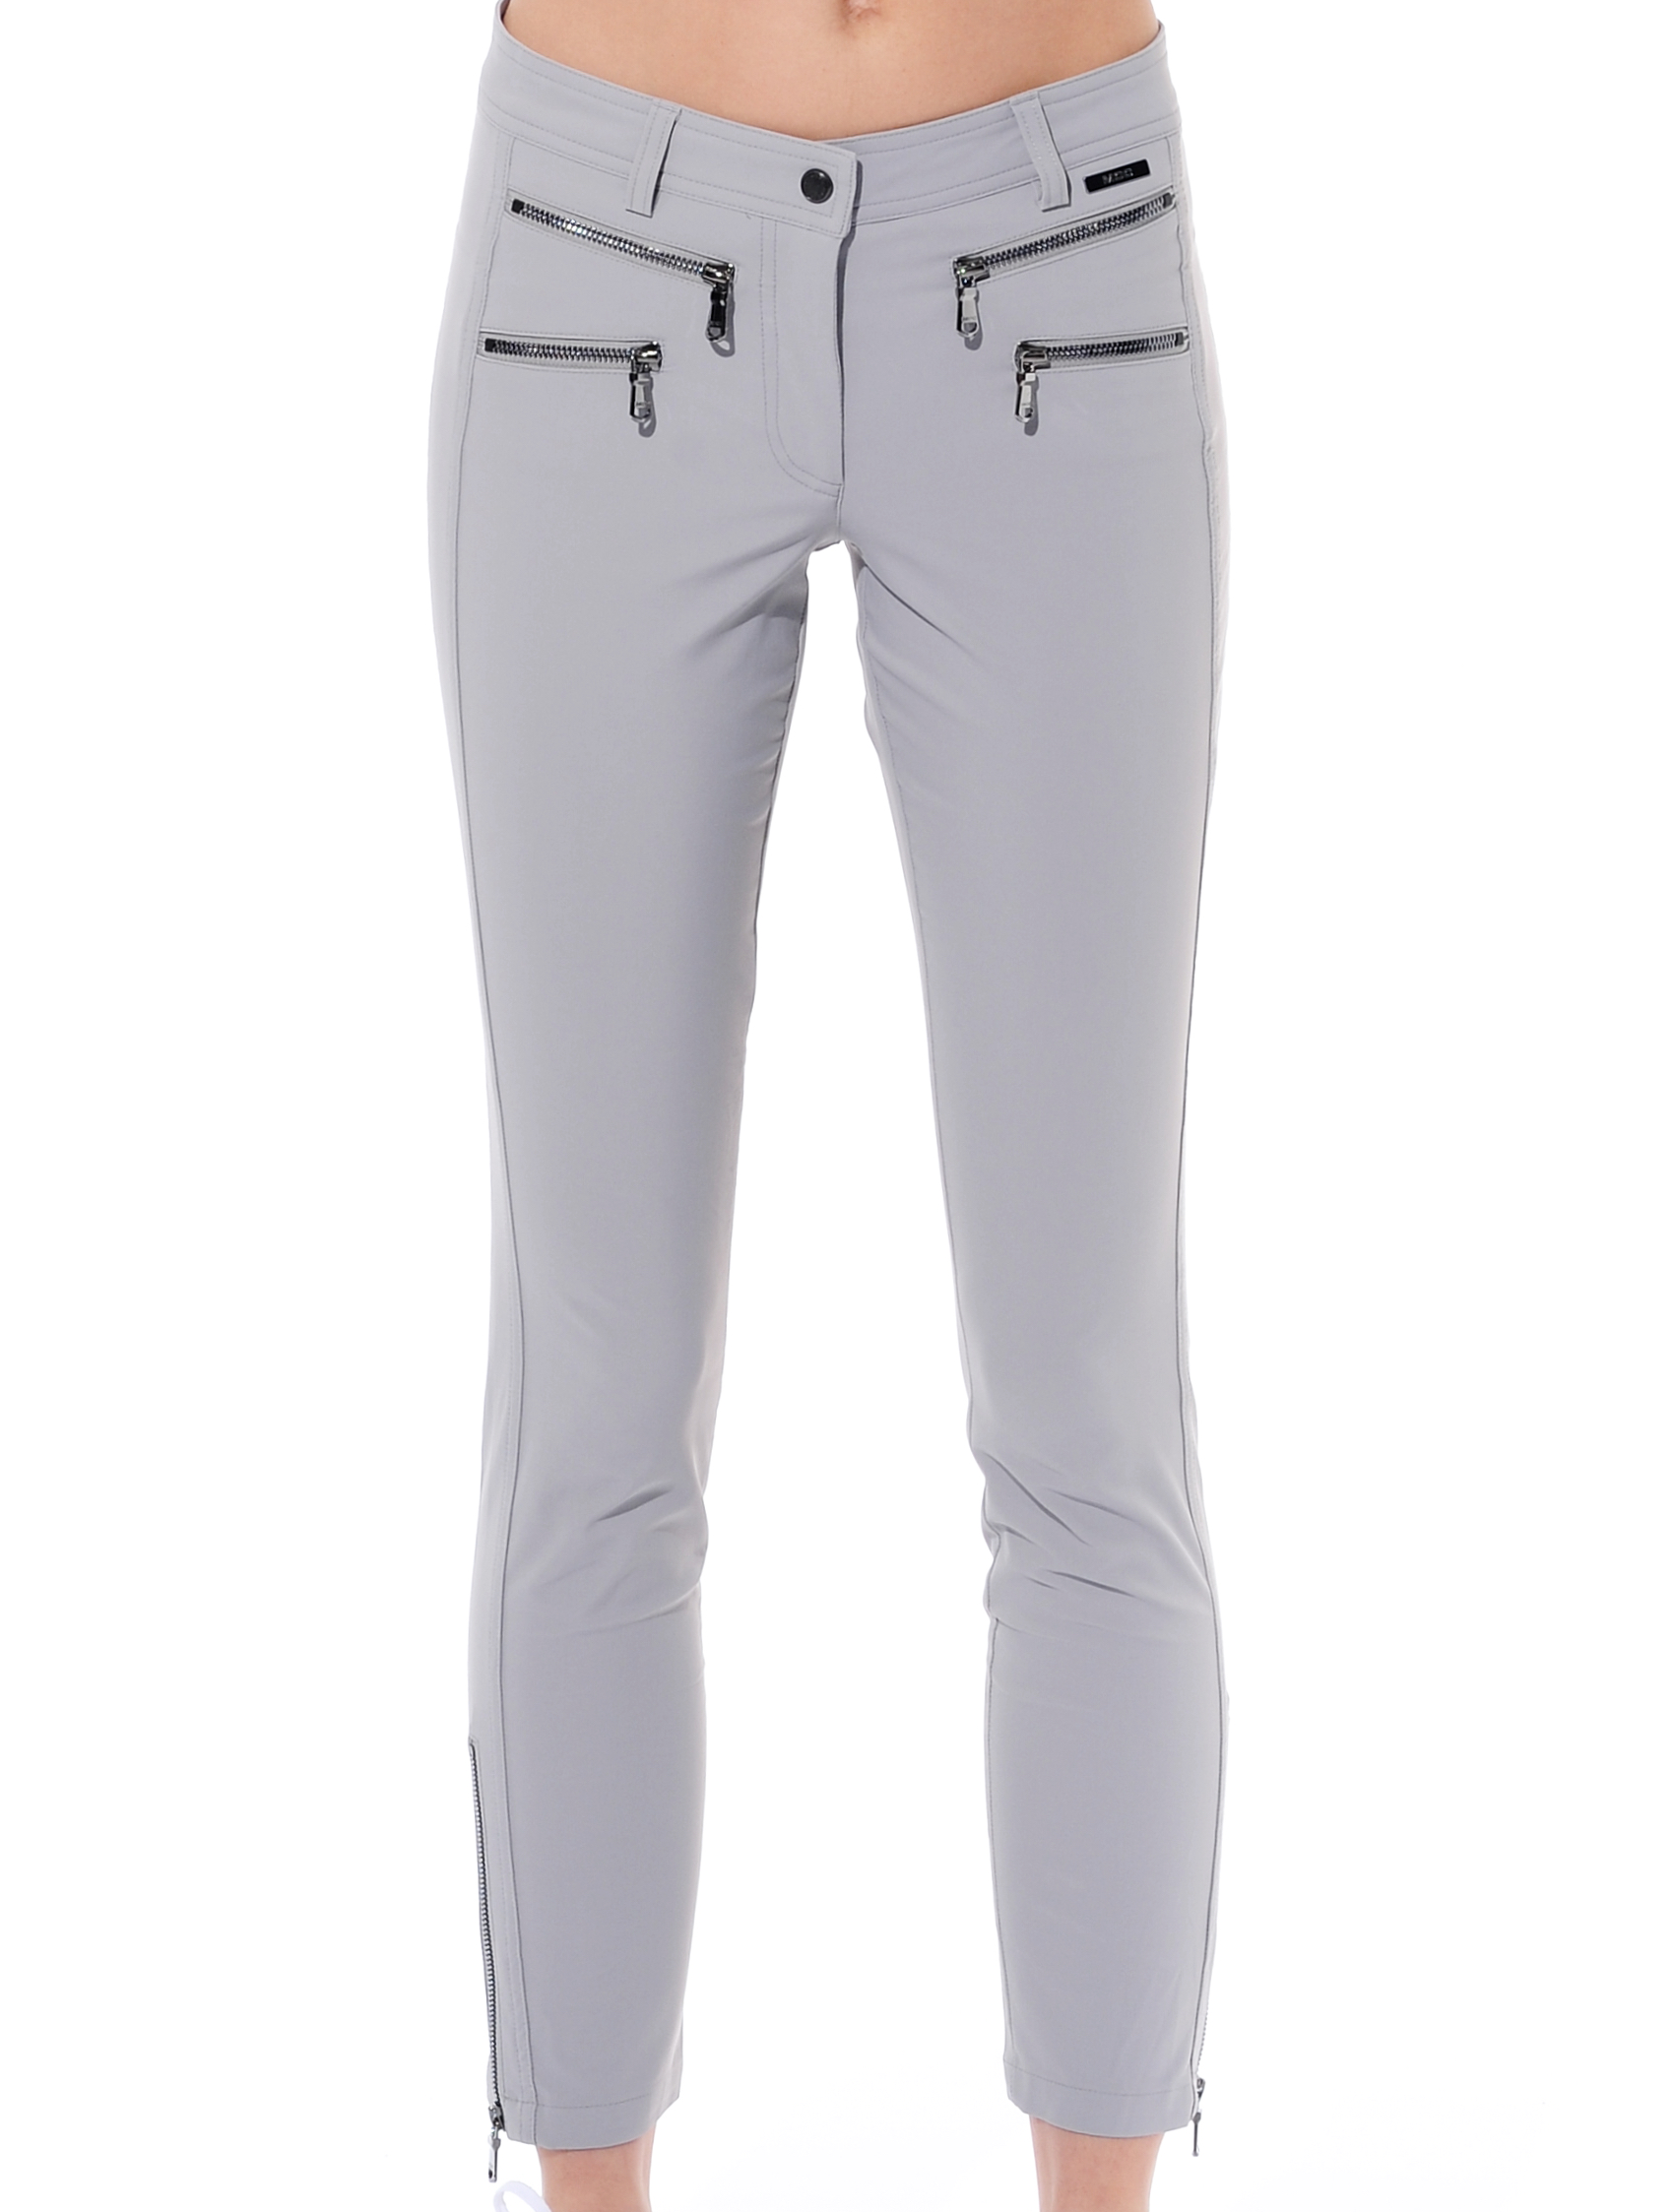 4way stretch double zip ankle pants grey 